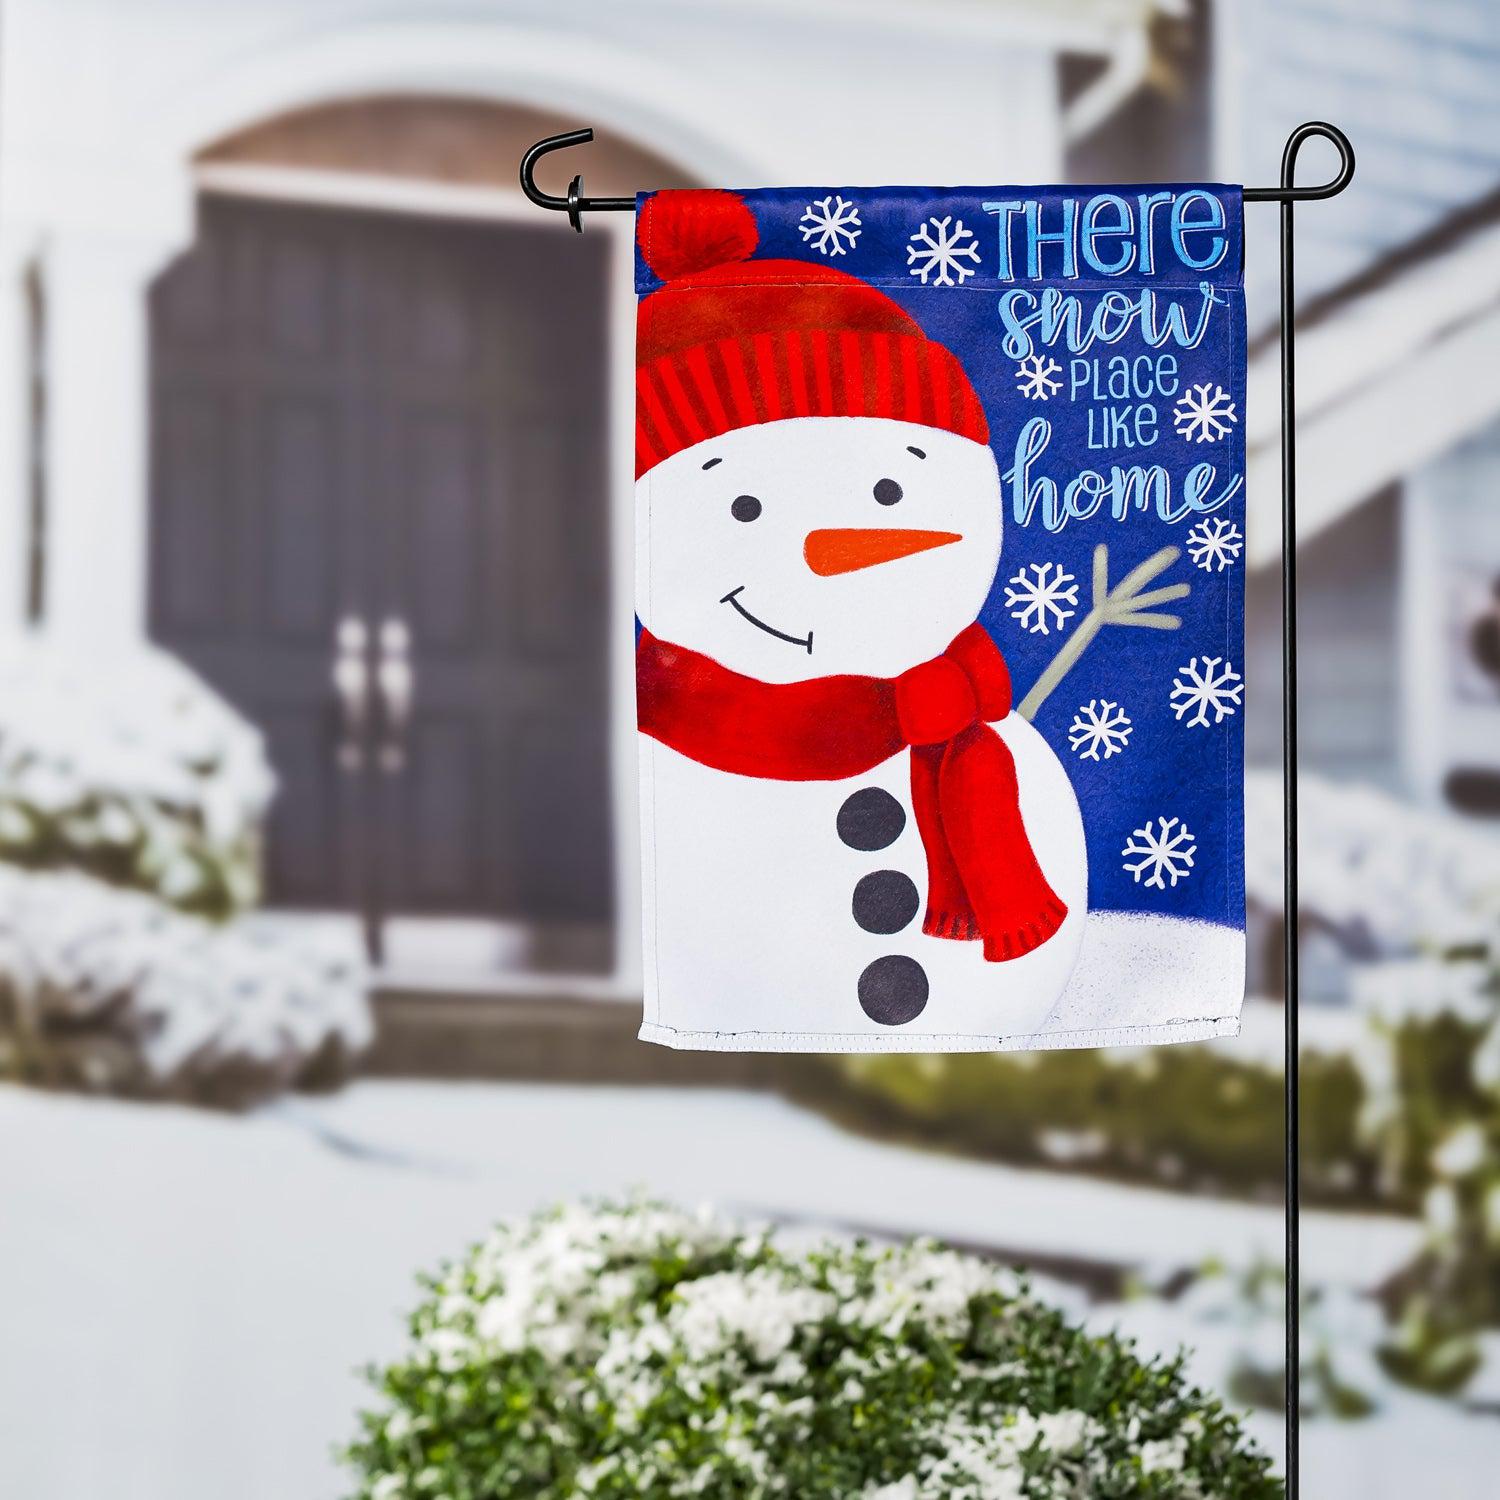 The There's Snow Place Like Home garden flag features a happy snowman with a red hat and scarf.